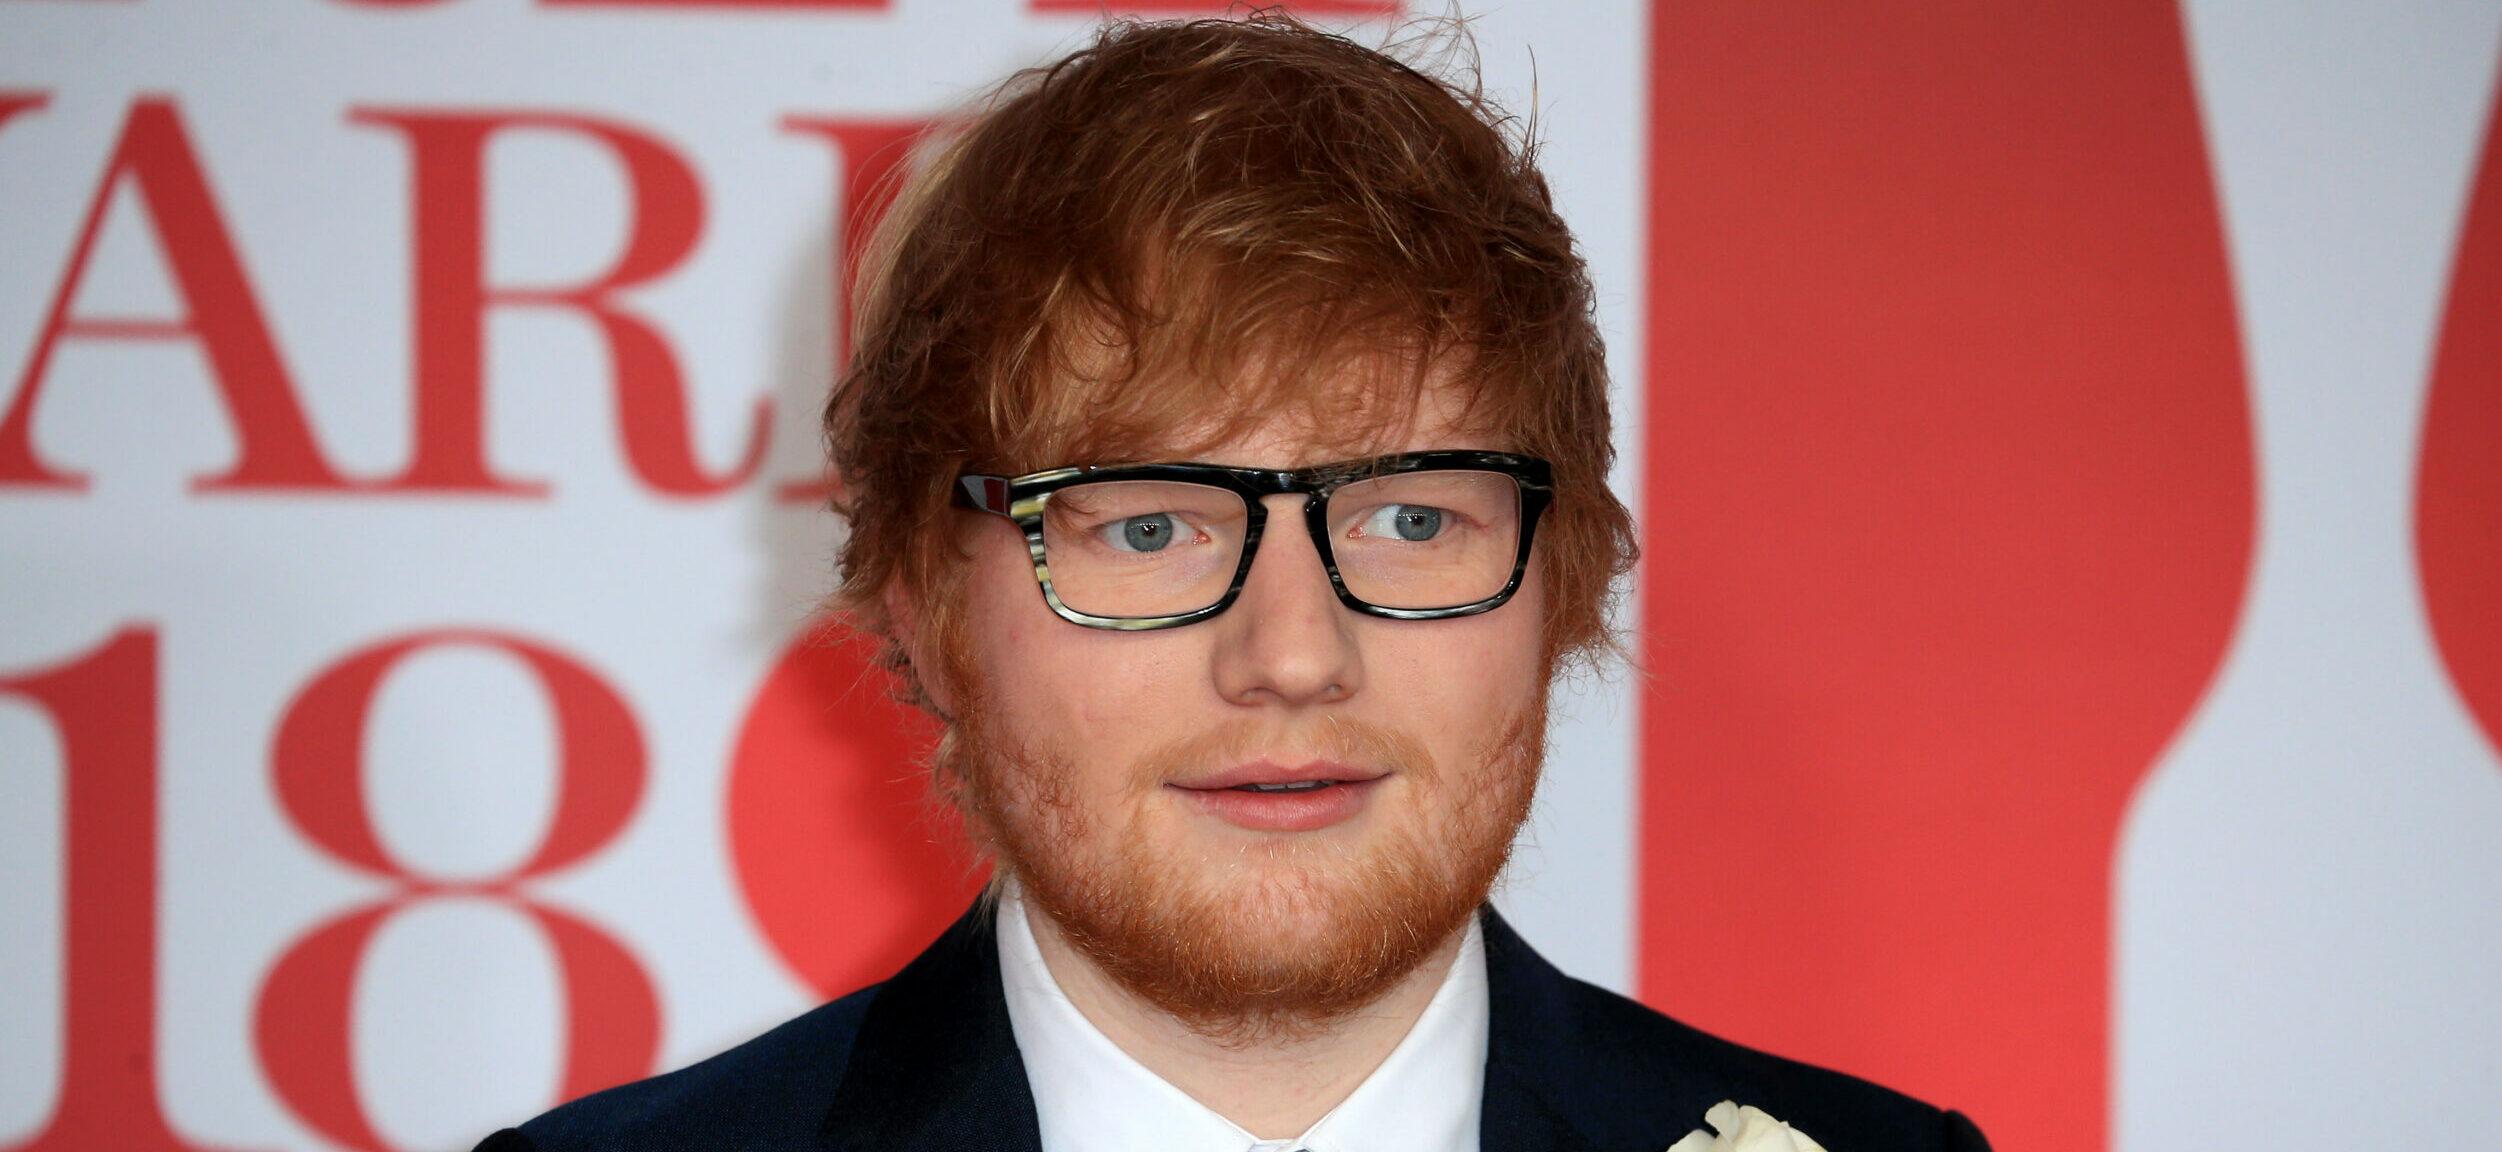 Ed Sheeran Look Alike Gets Mobbed By Fans On Daily Basis